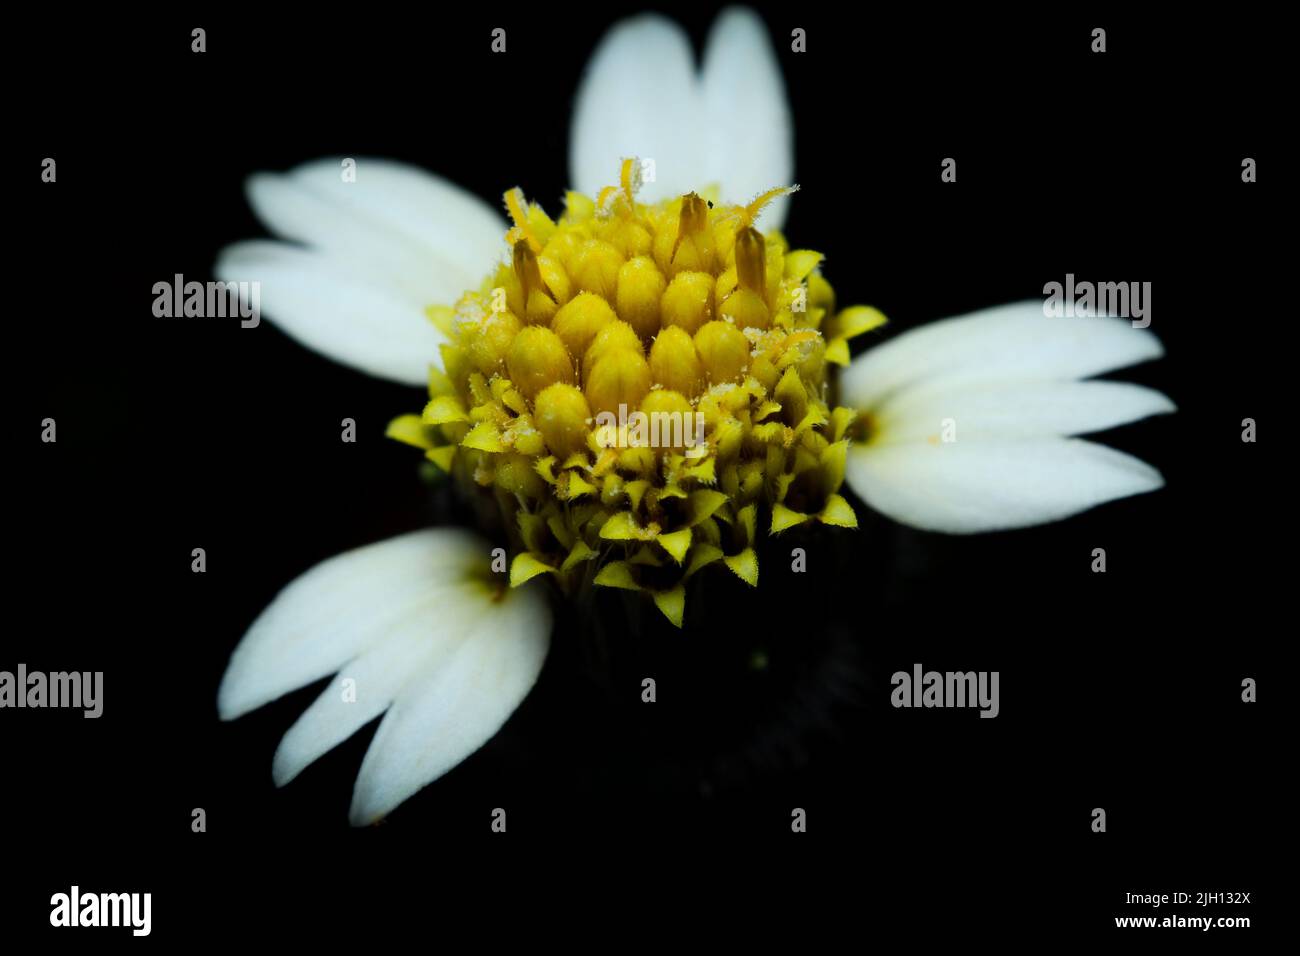 A closeup shot of a shaggy soldier flower against a black background Stock Photo